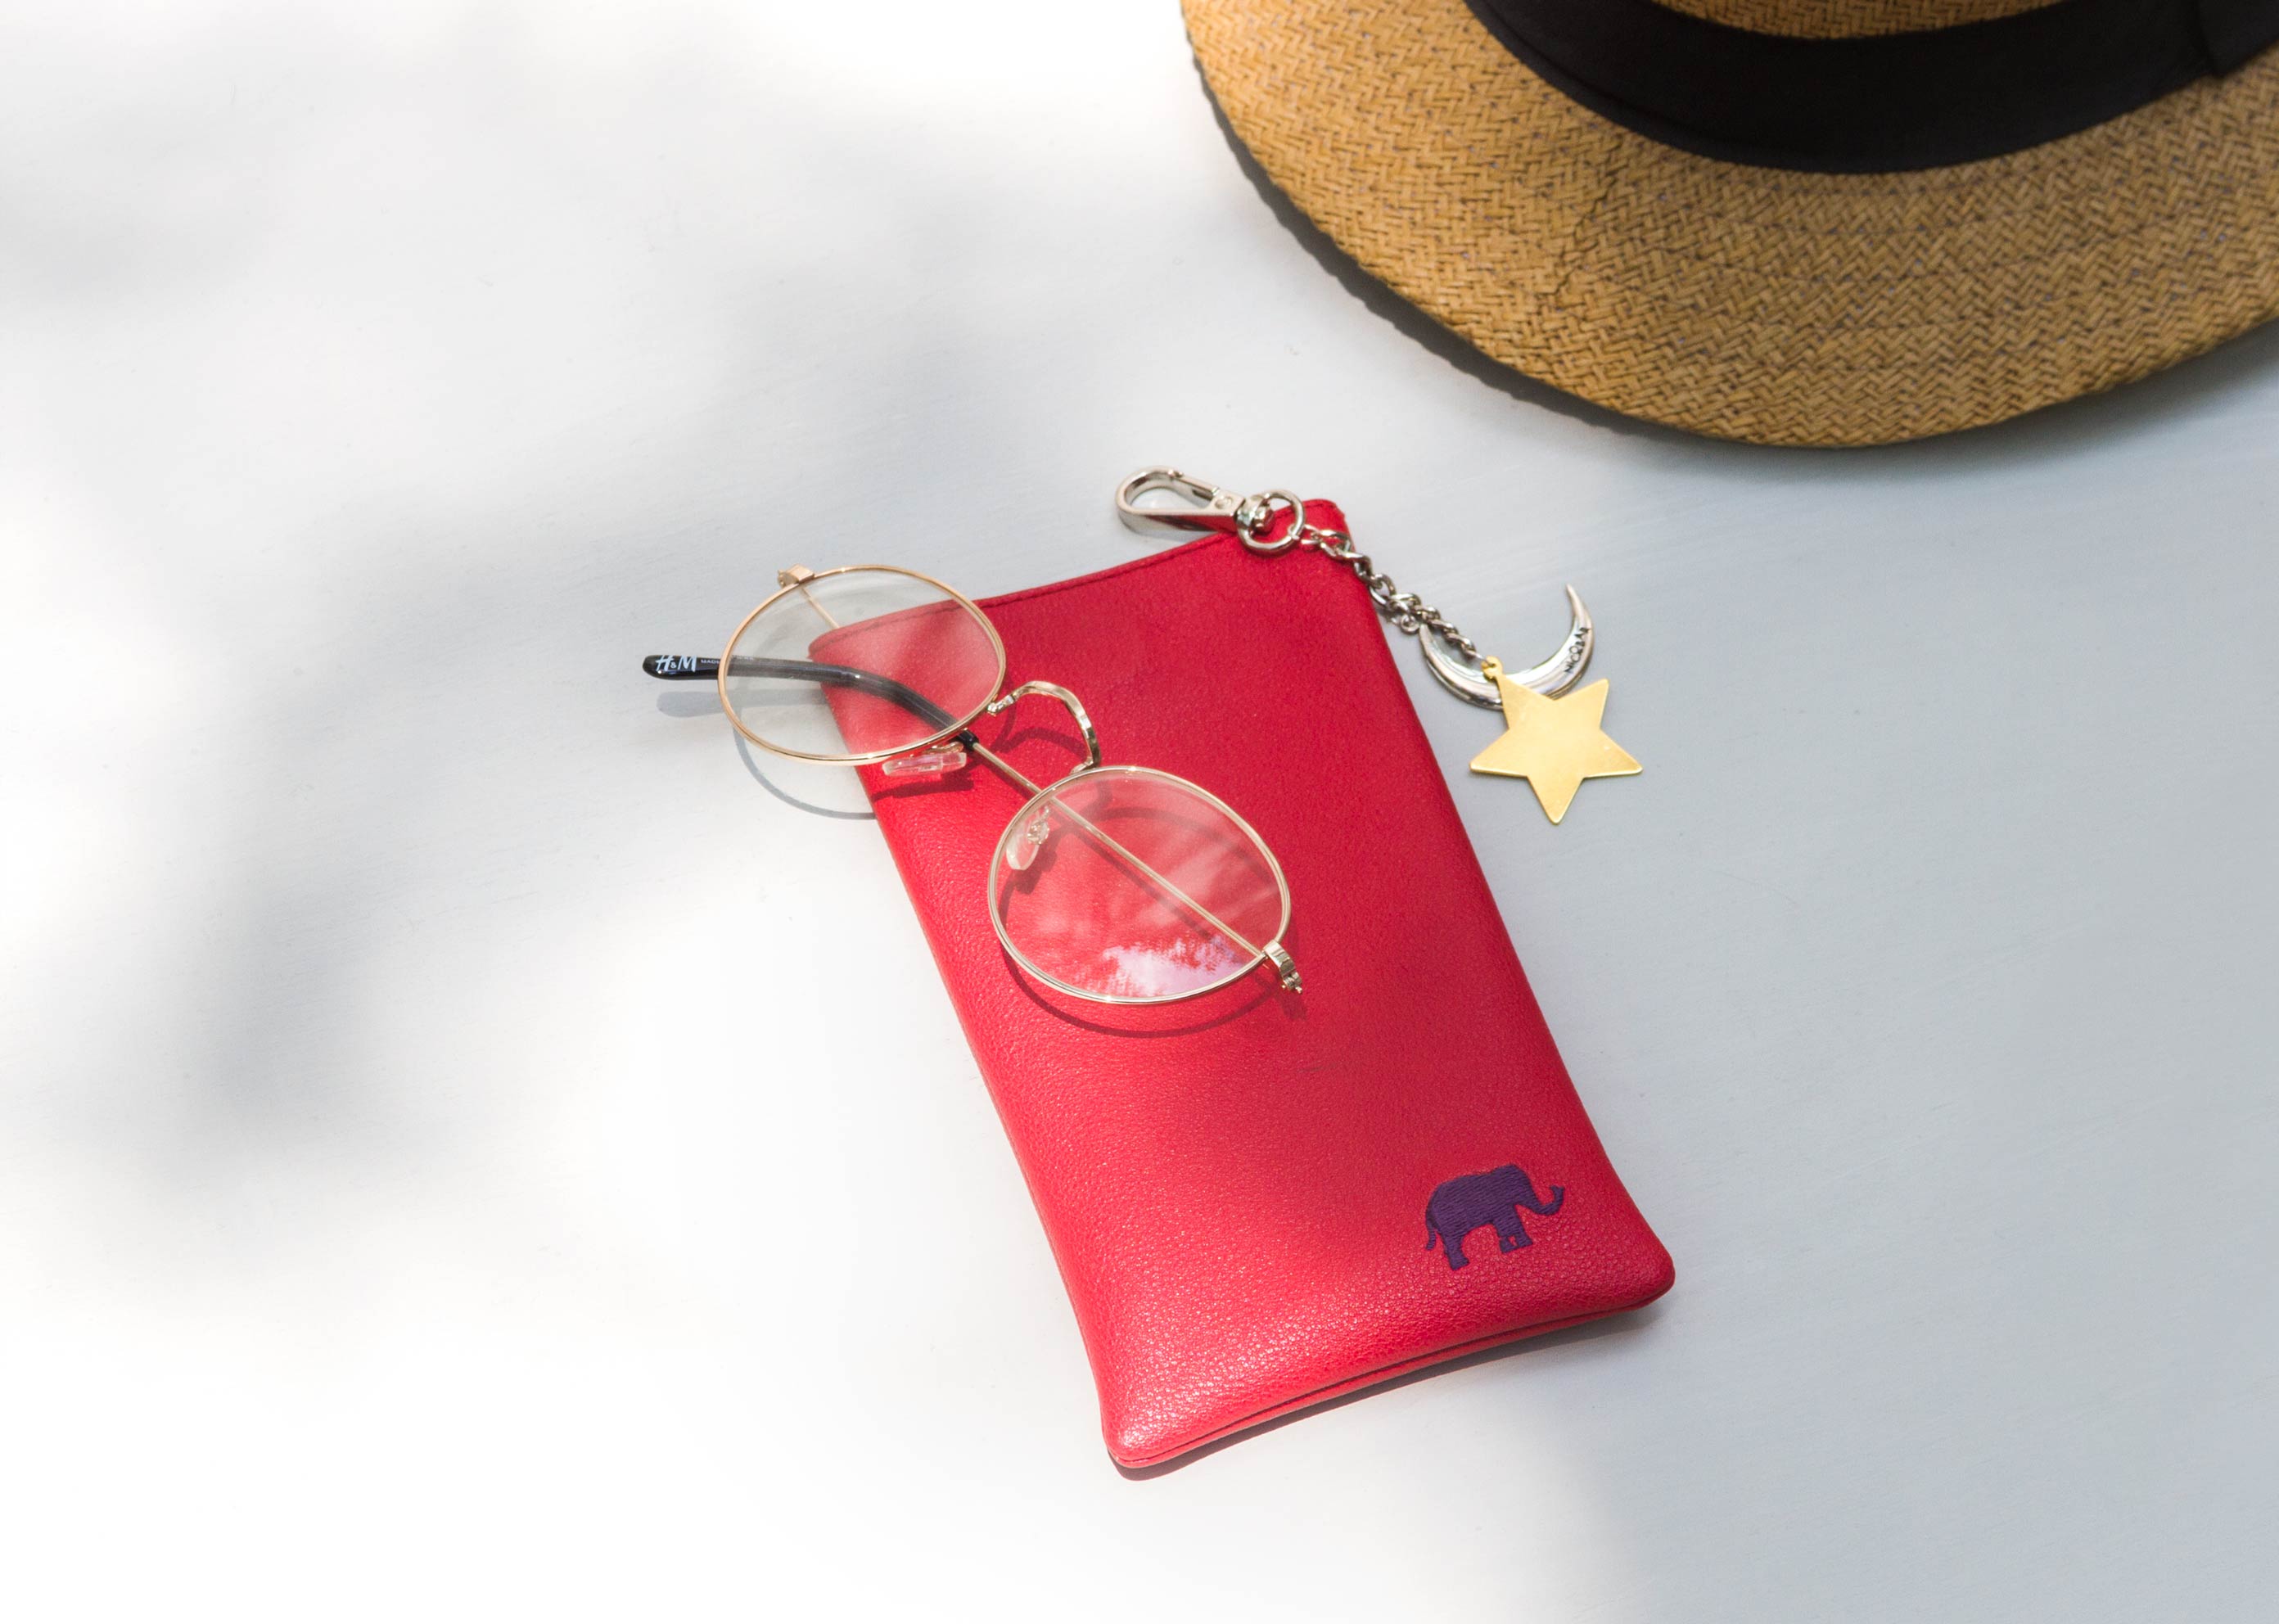 Tusker Spectacle Case - Red